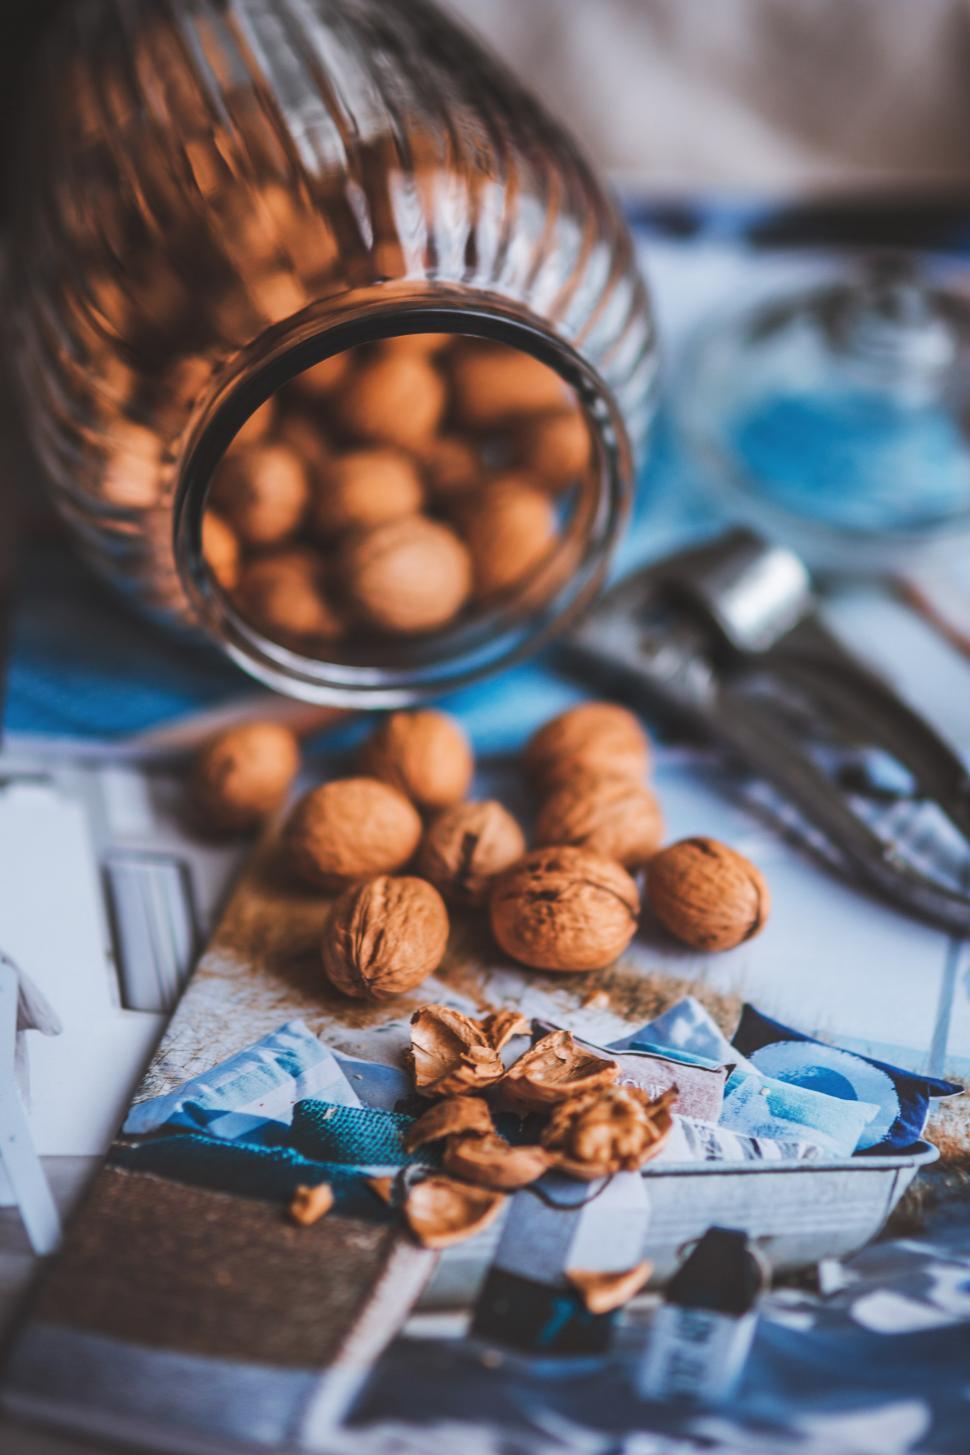 Free Image of Glass Jar Filled With Nuts on Table 